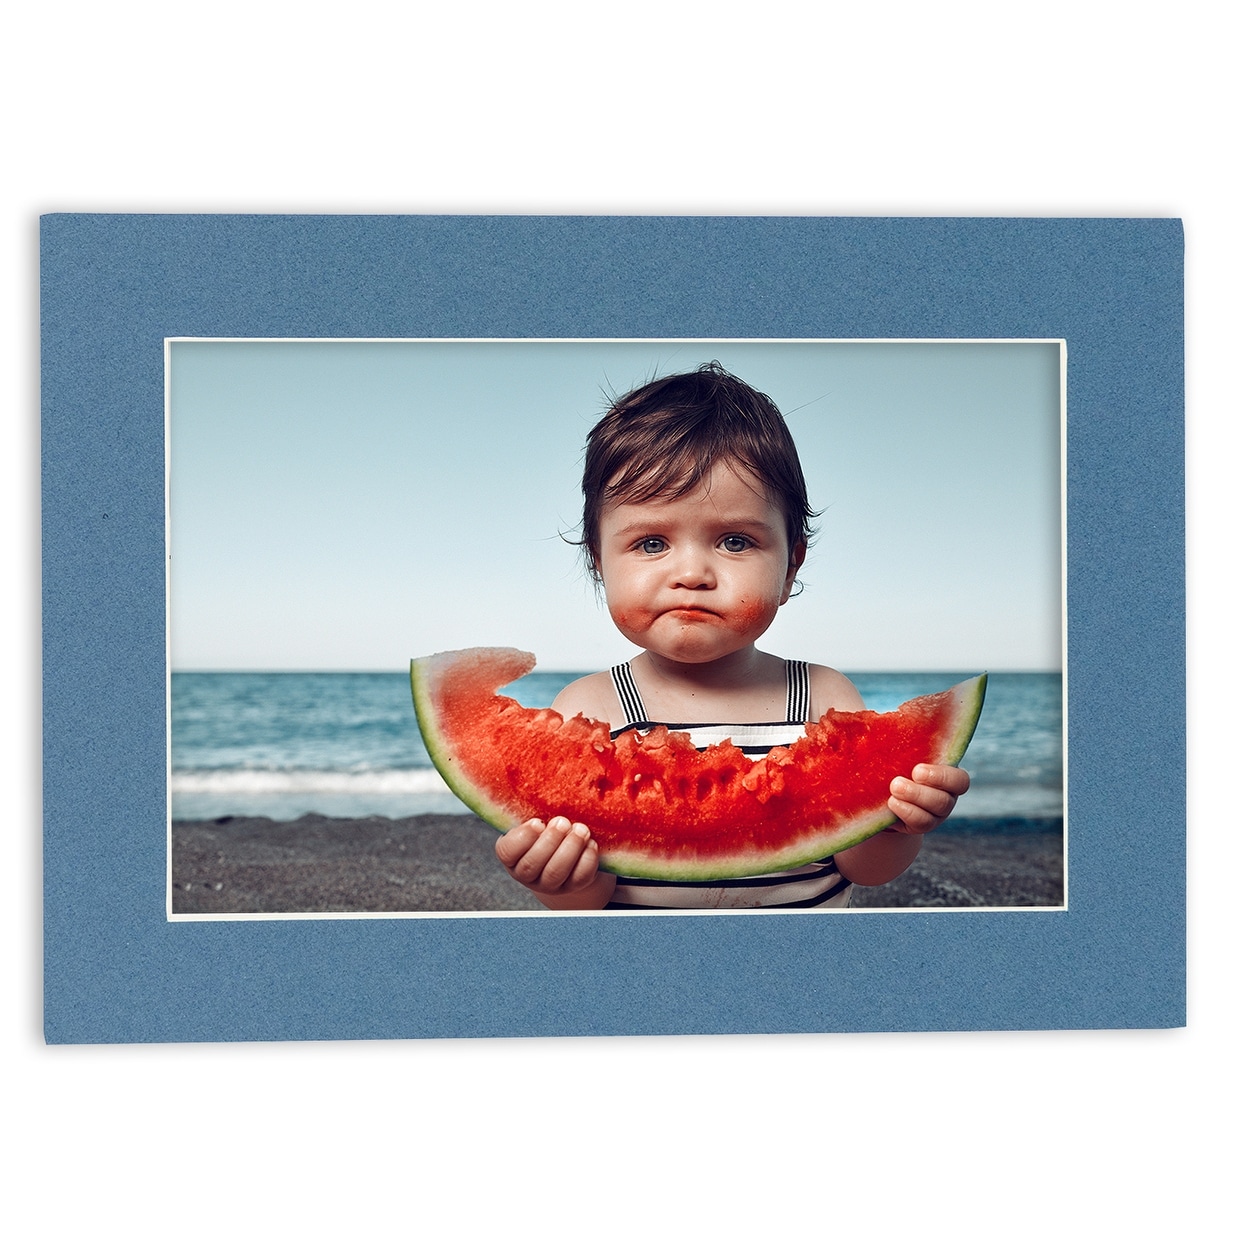 11x14 Mat Bevel Cut for 9x11 Photos - Acid Free Steel Blue Precut Matboard  - For Pictures, Photos, Framing - Bed Bath & Beyond - 38473651